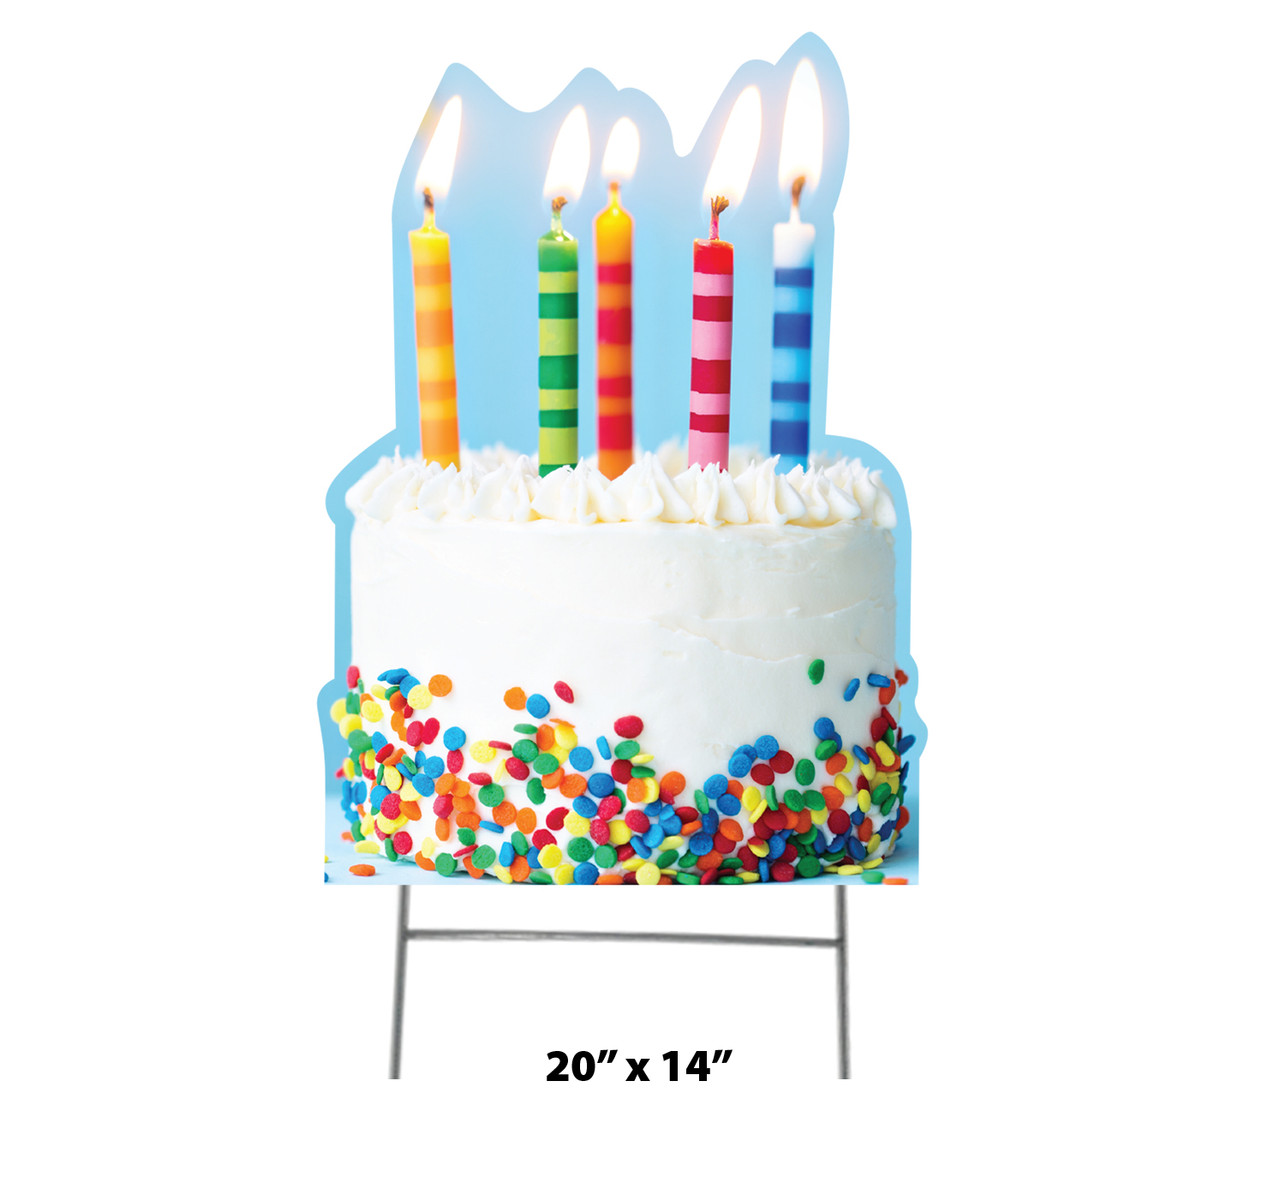 Coroplast outdoor yard sign icon of a birthday cake with dimensions.